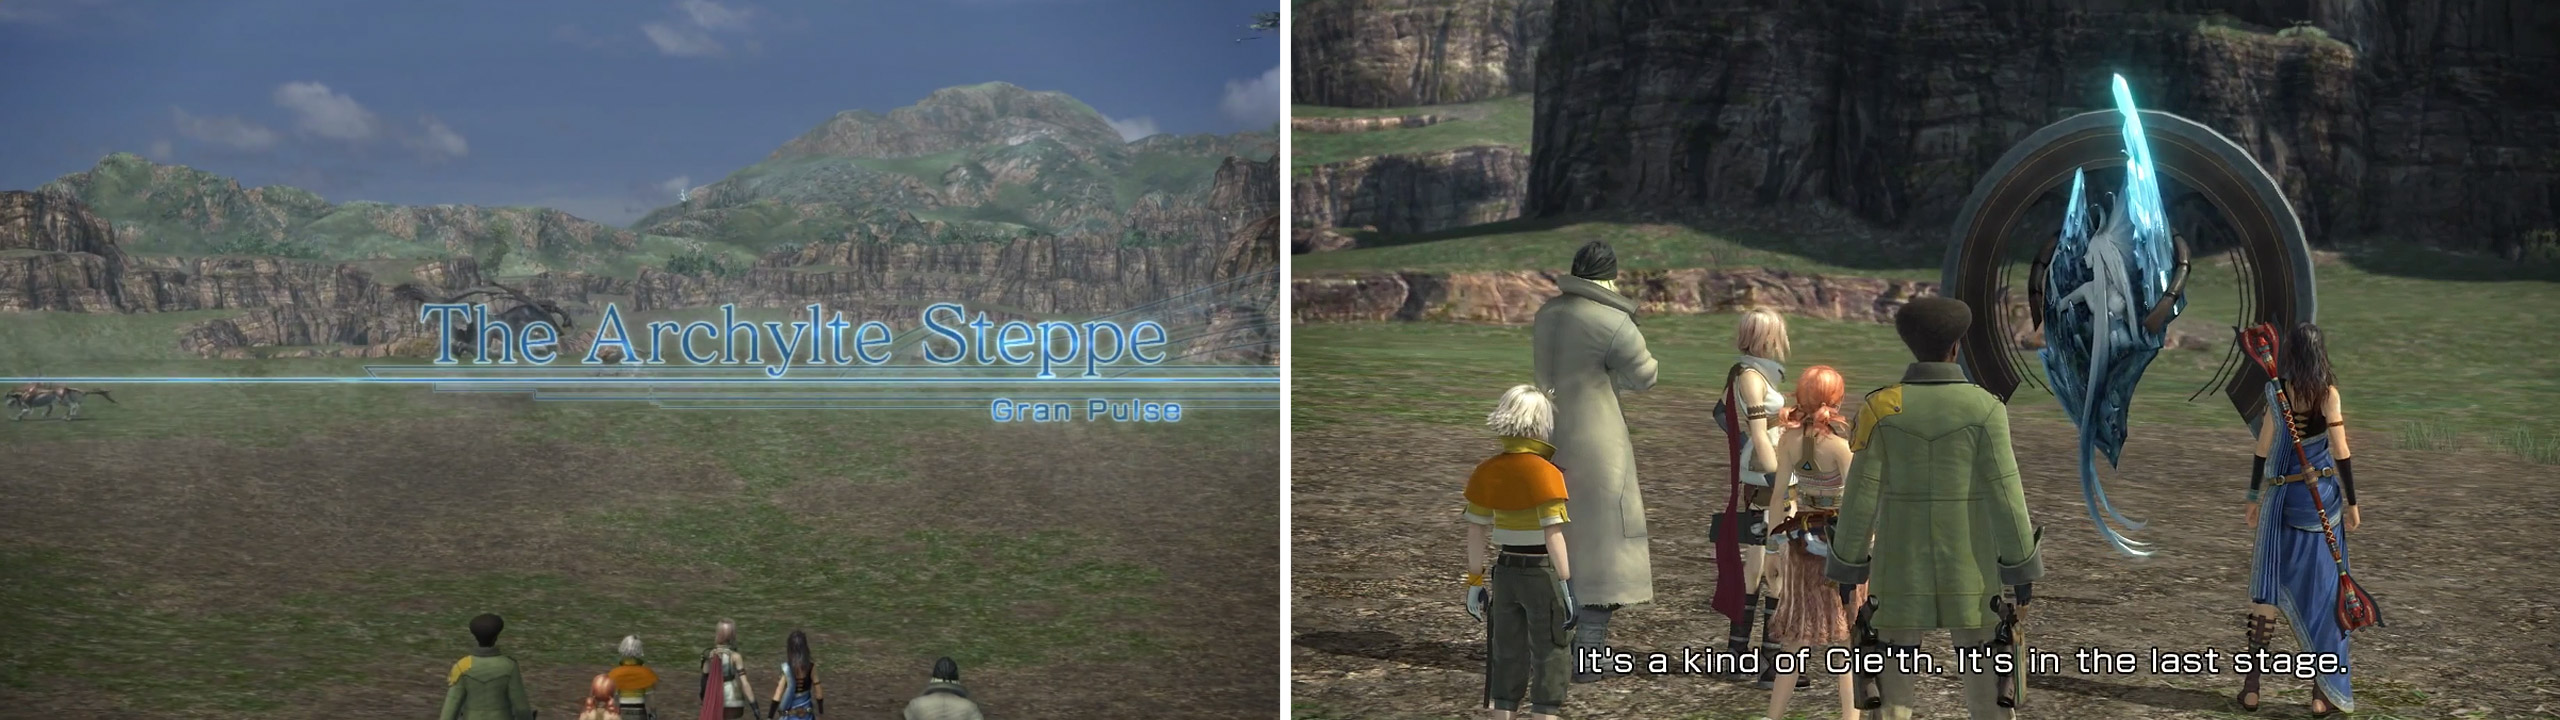 Welcome to the massive Archylte Steppe (left) where you will find your first Cie’th Stone (right).